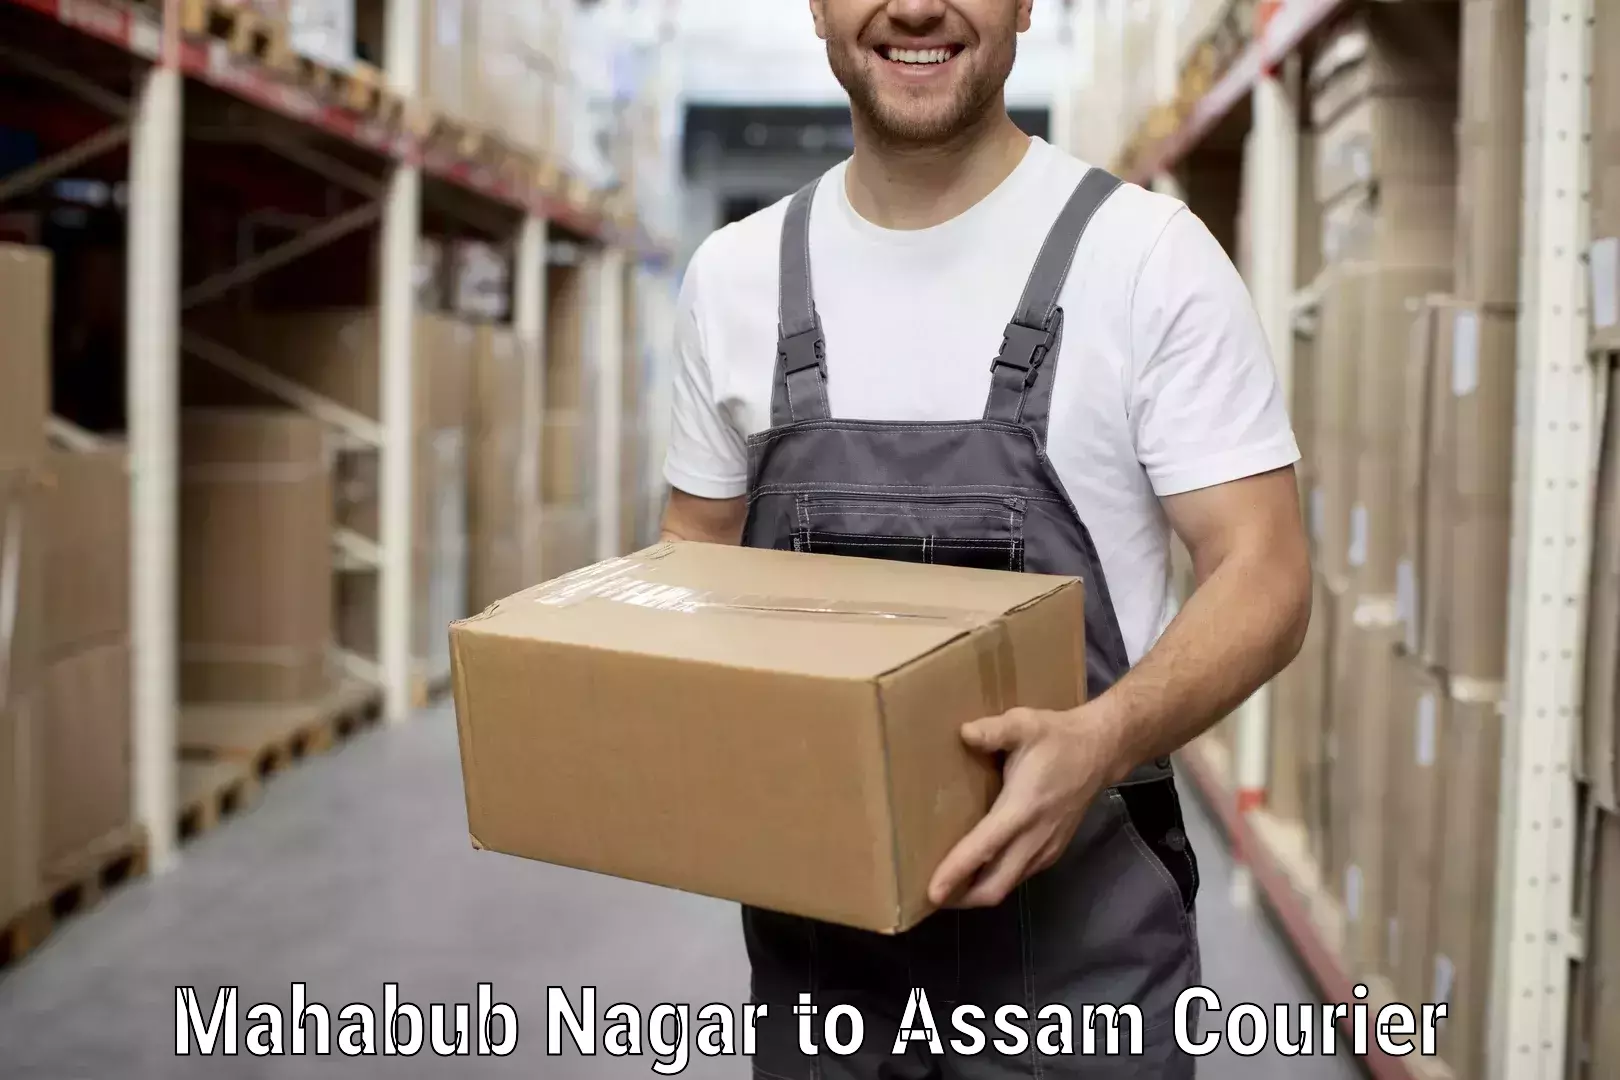 Trusted relocation services Mahabub Nagar to Udharbond